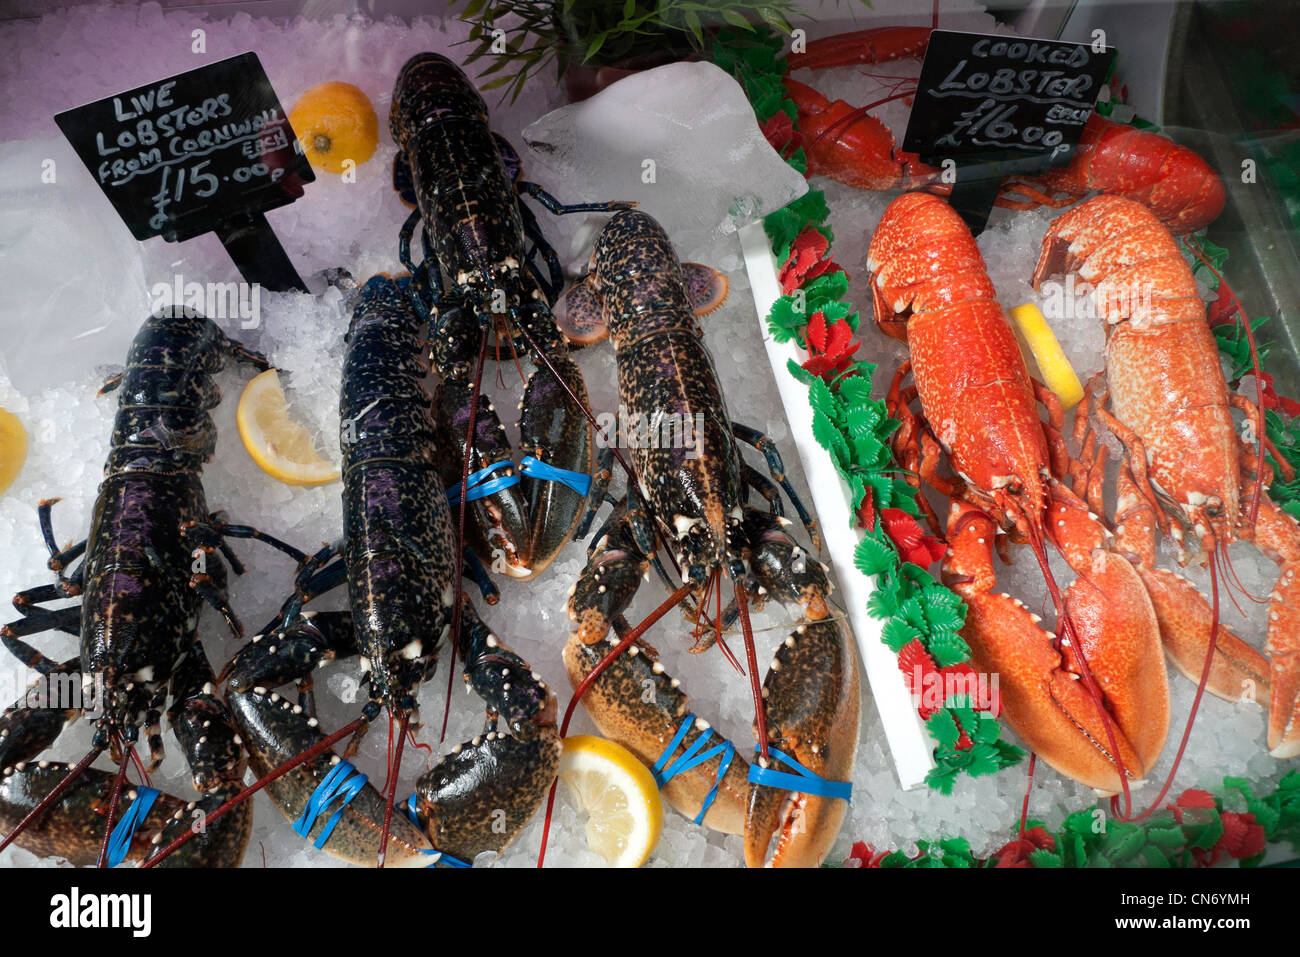 Live lobster from Cornwall and cooked lobsters on ice with lemon selling at a fish stall in Swansea Market Wales UK KATHY DEWITT Stock Photo